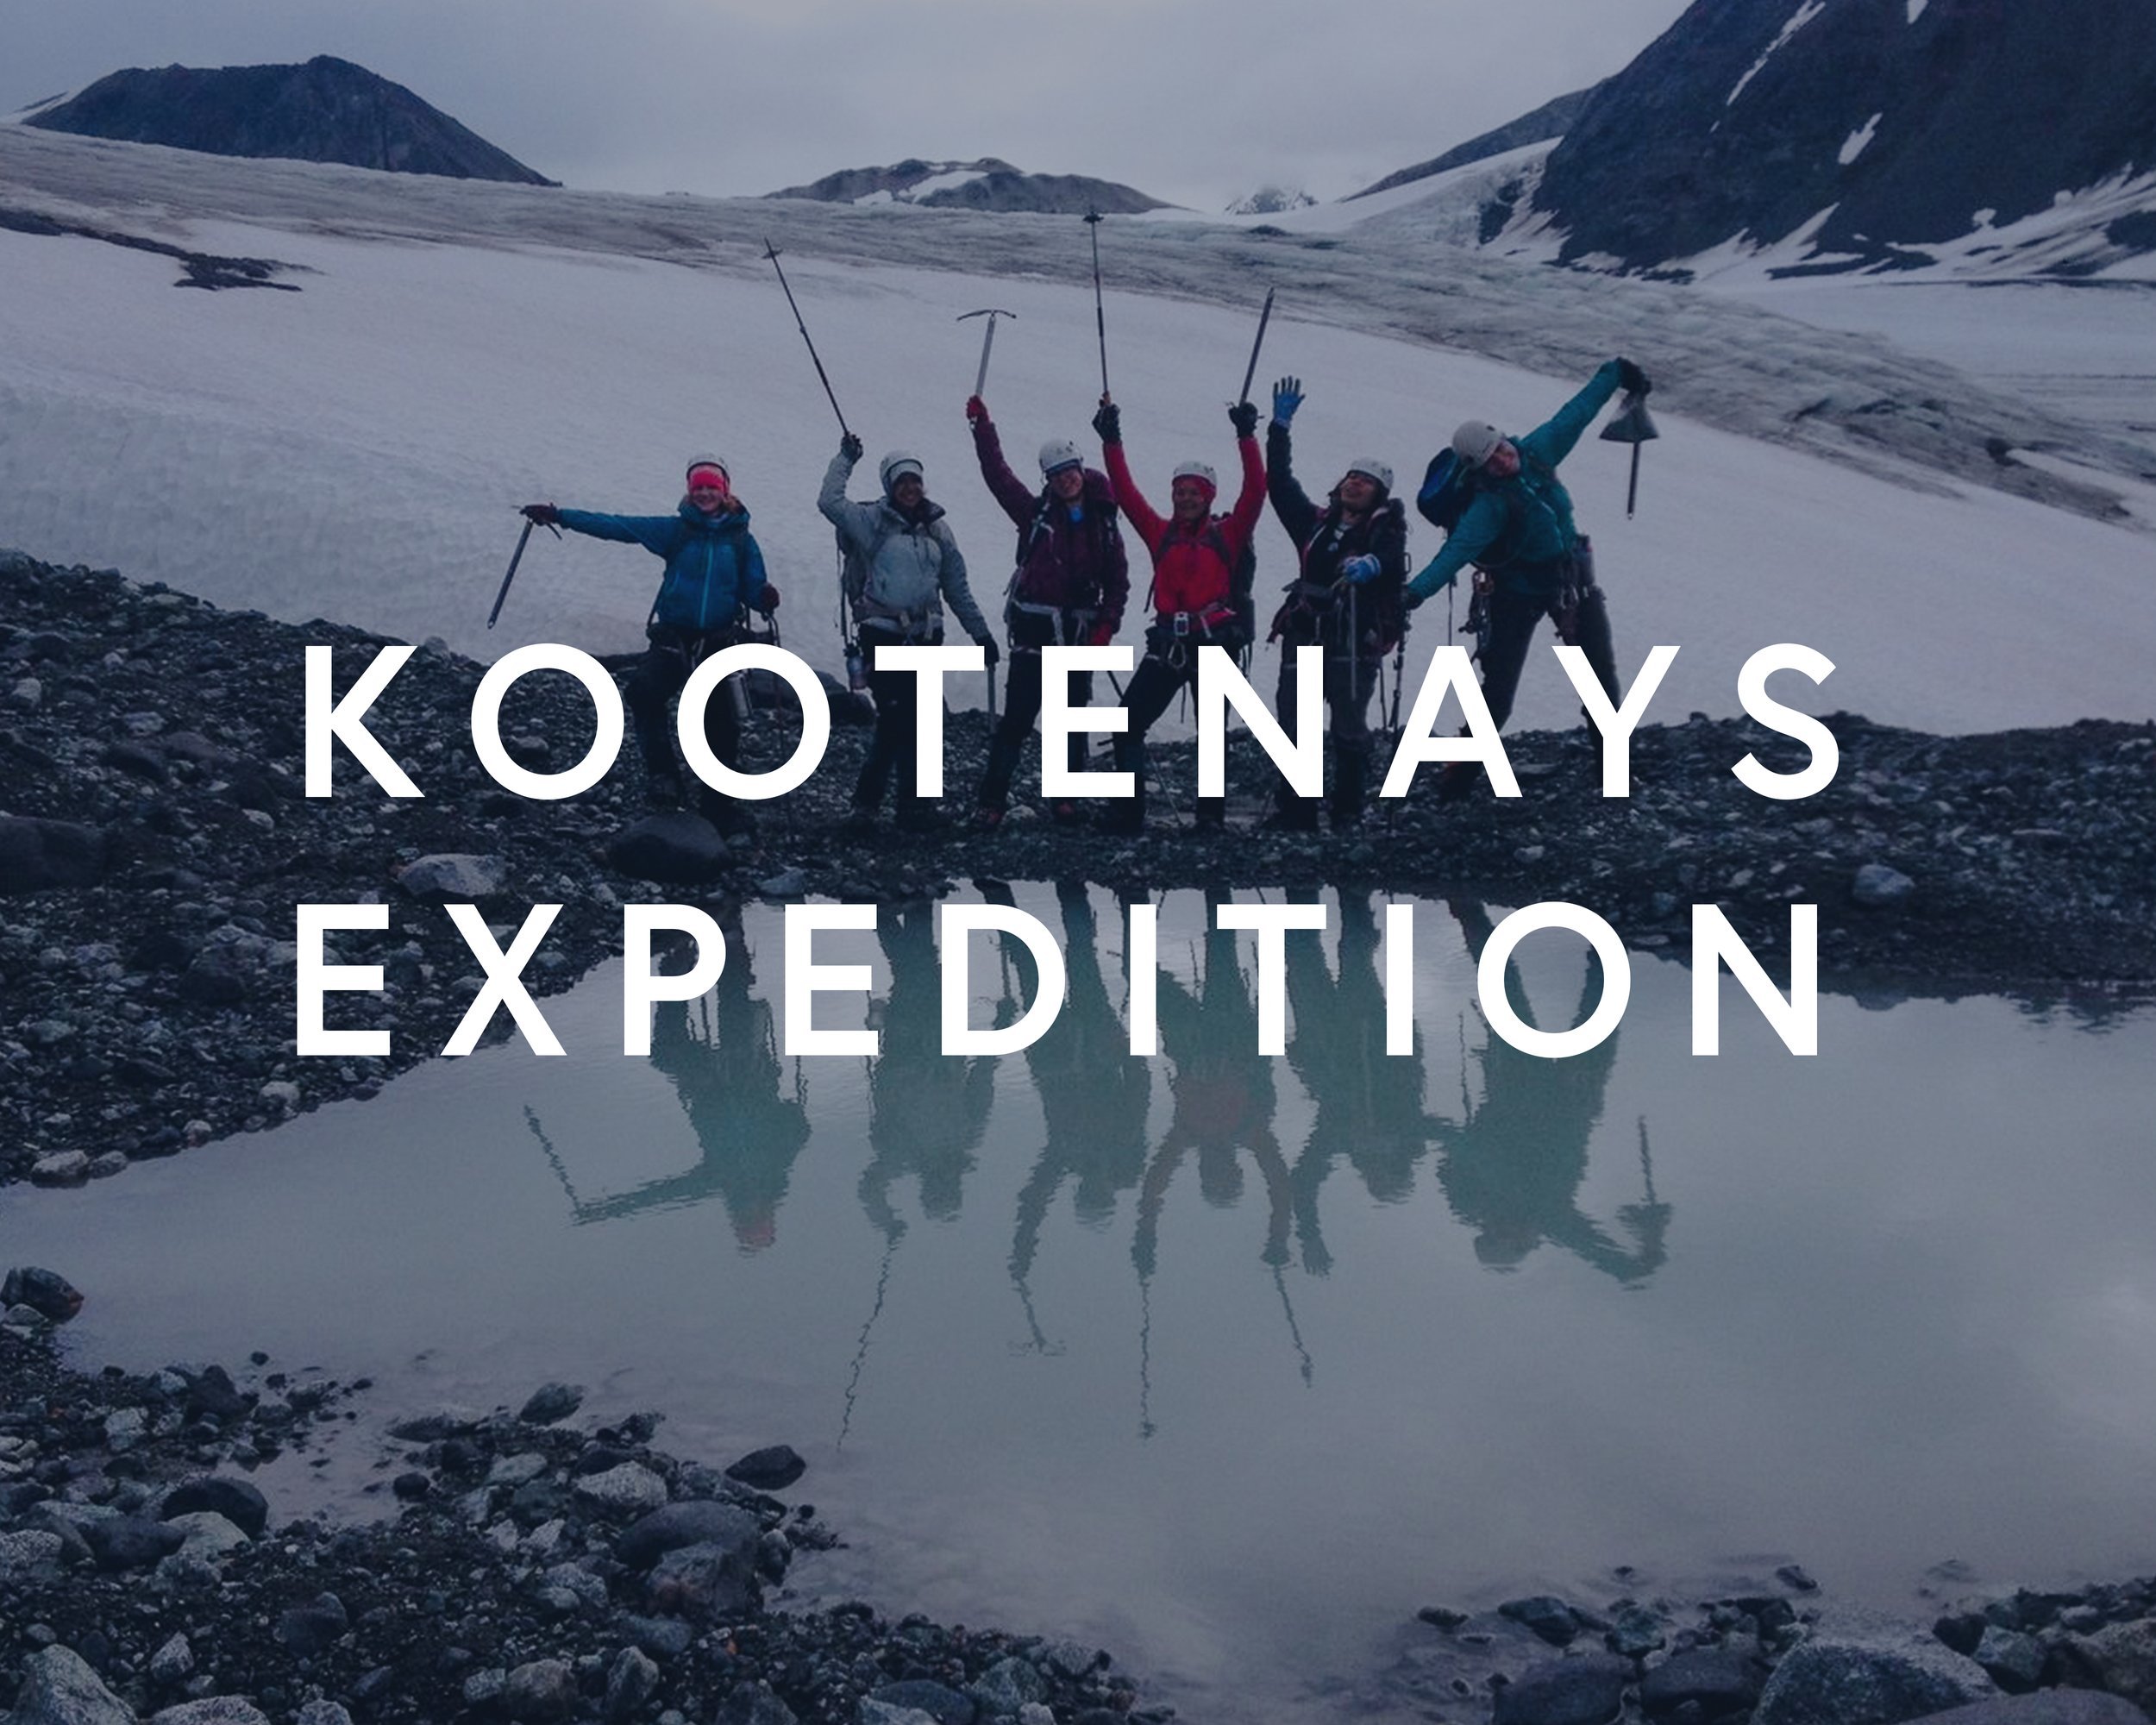 Image links to the Kootenays expedition information page (Copy)